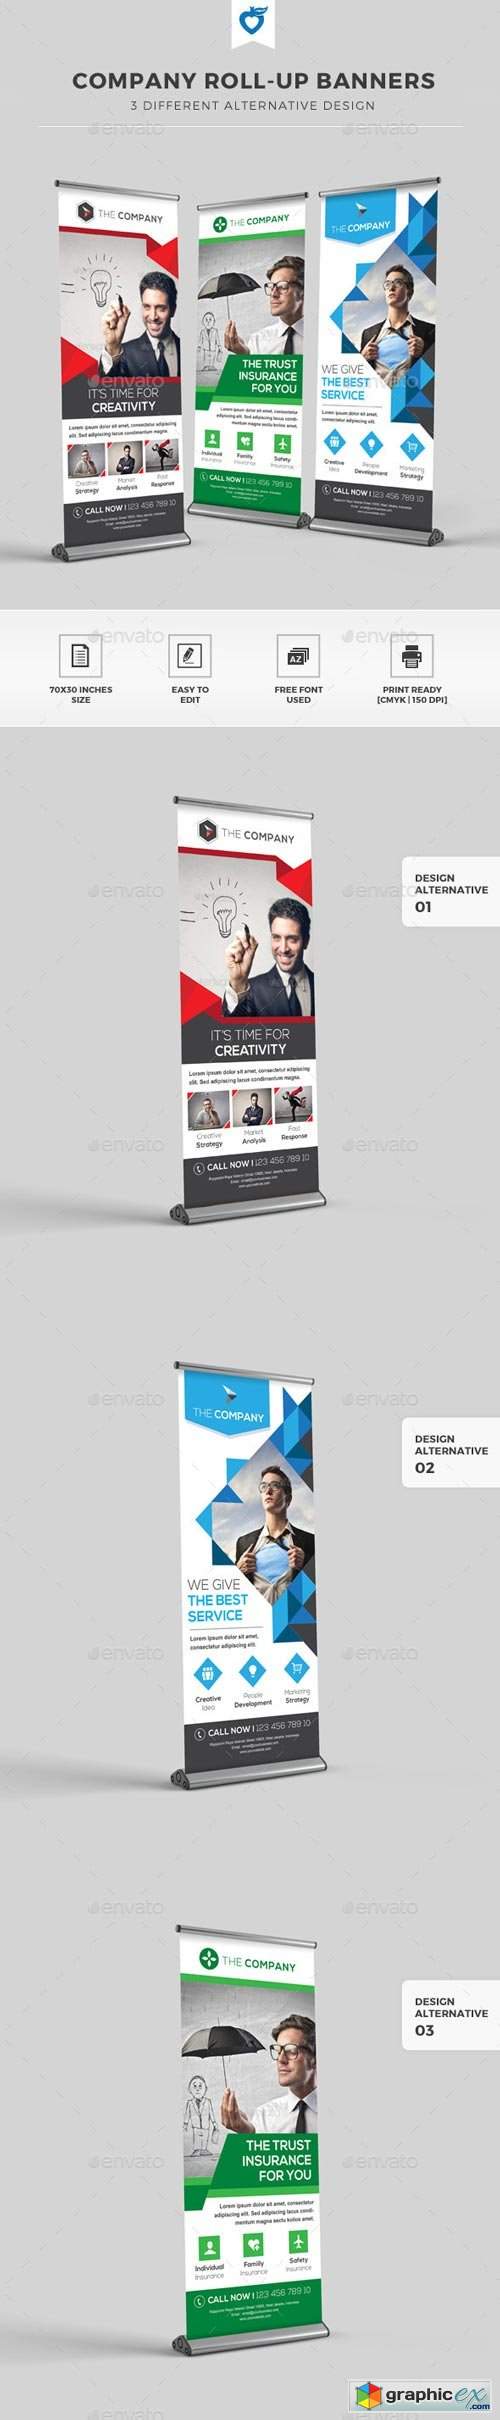 Company Roll-up Banners